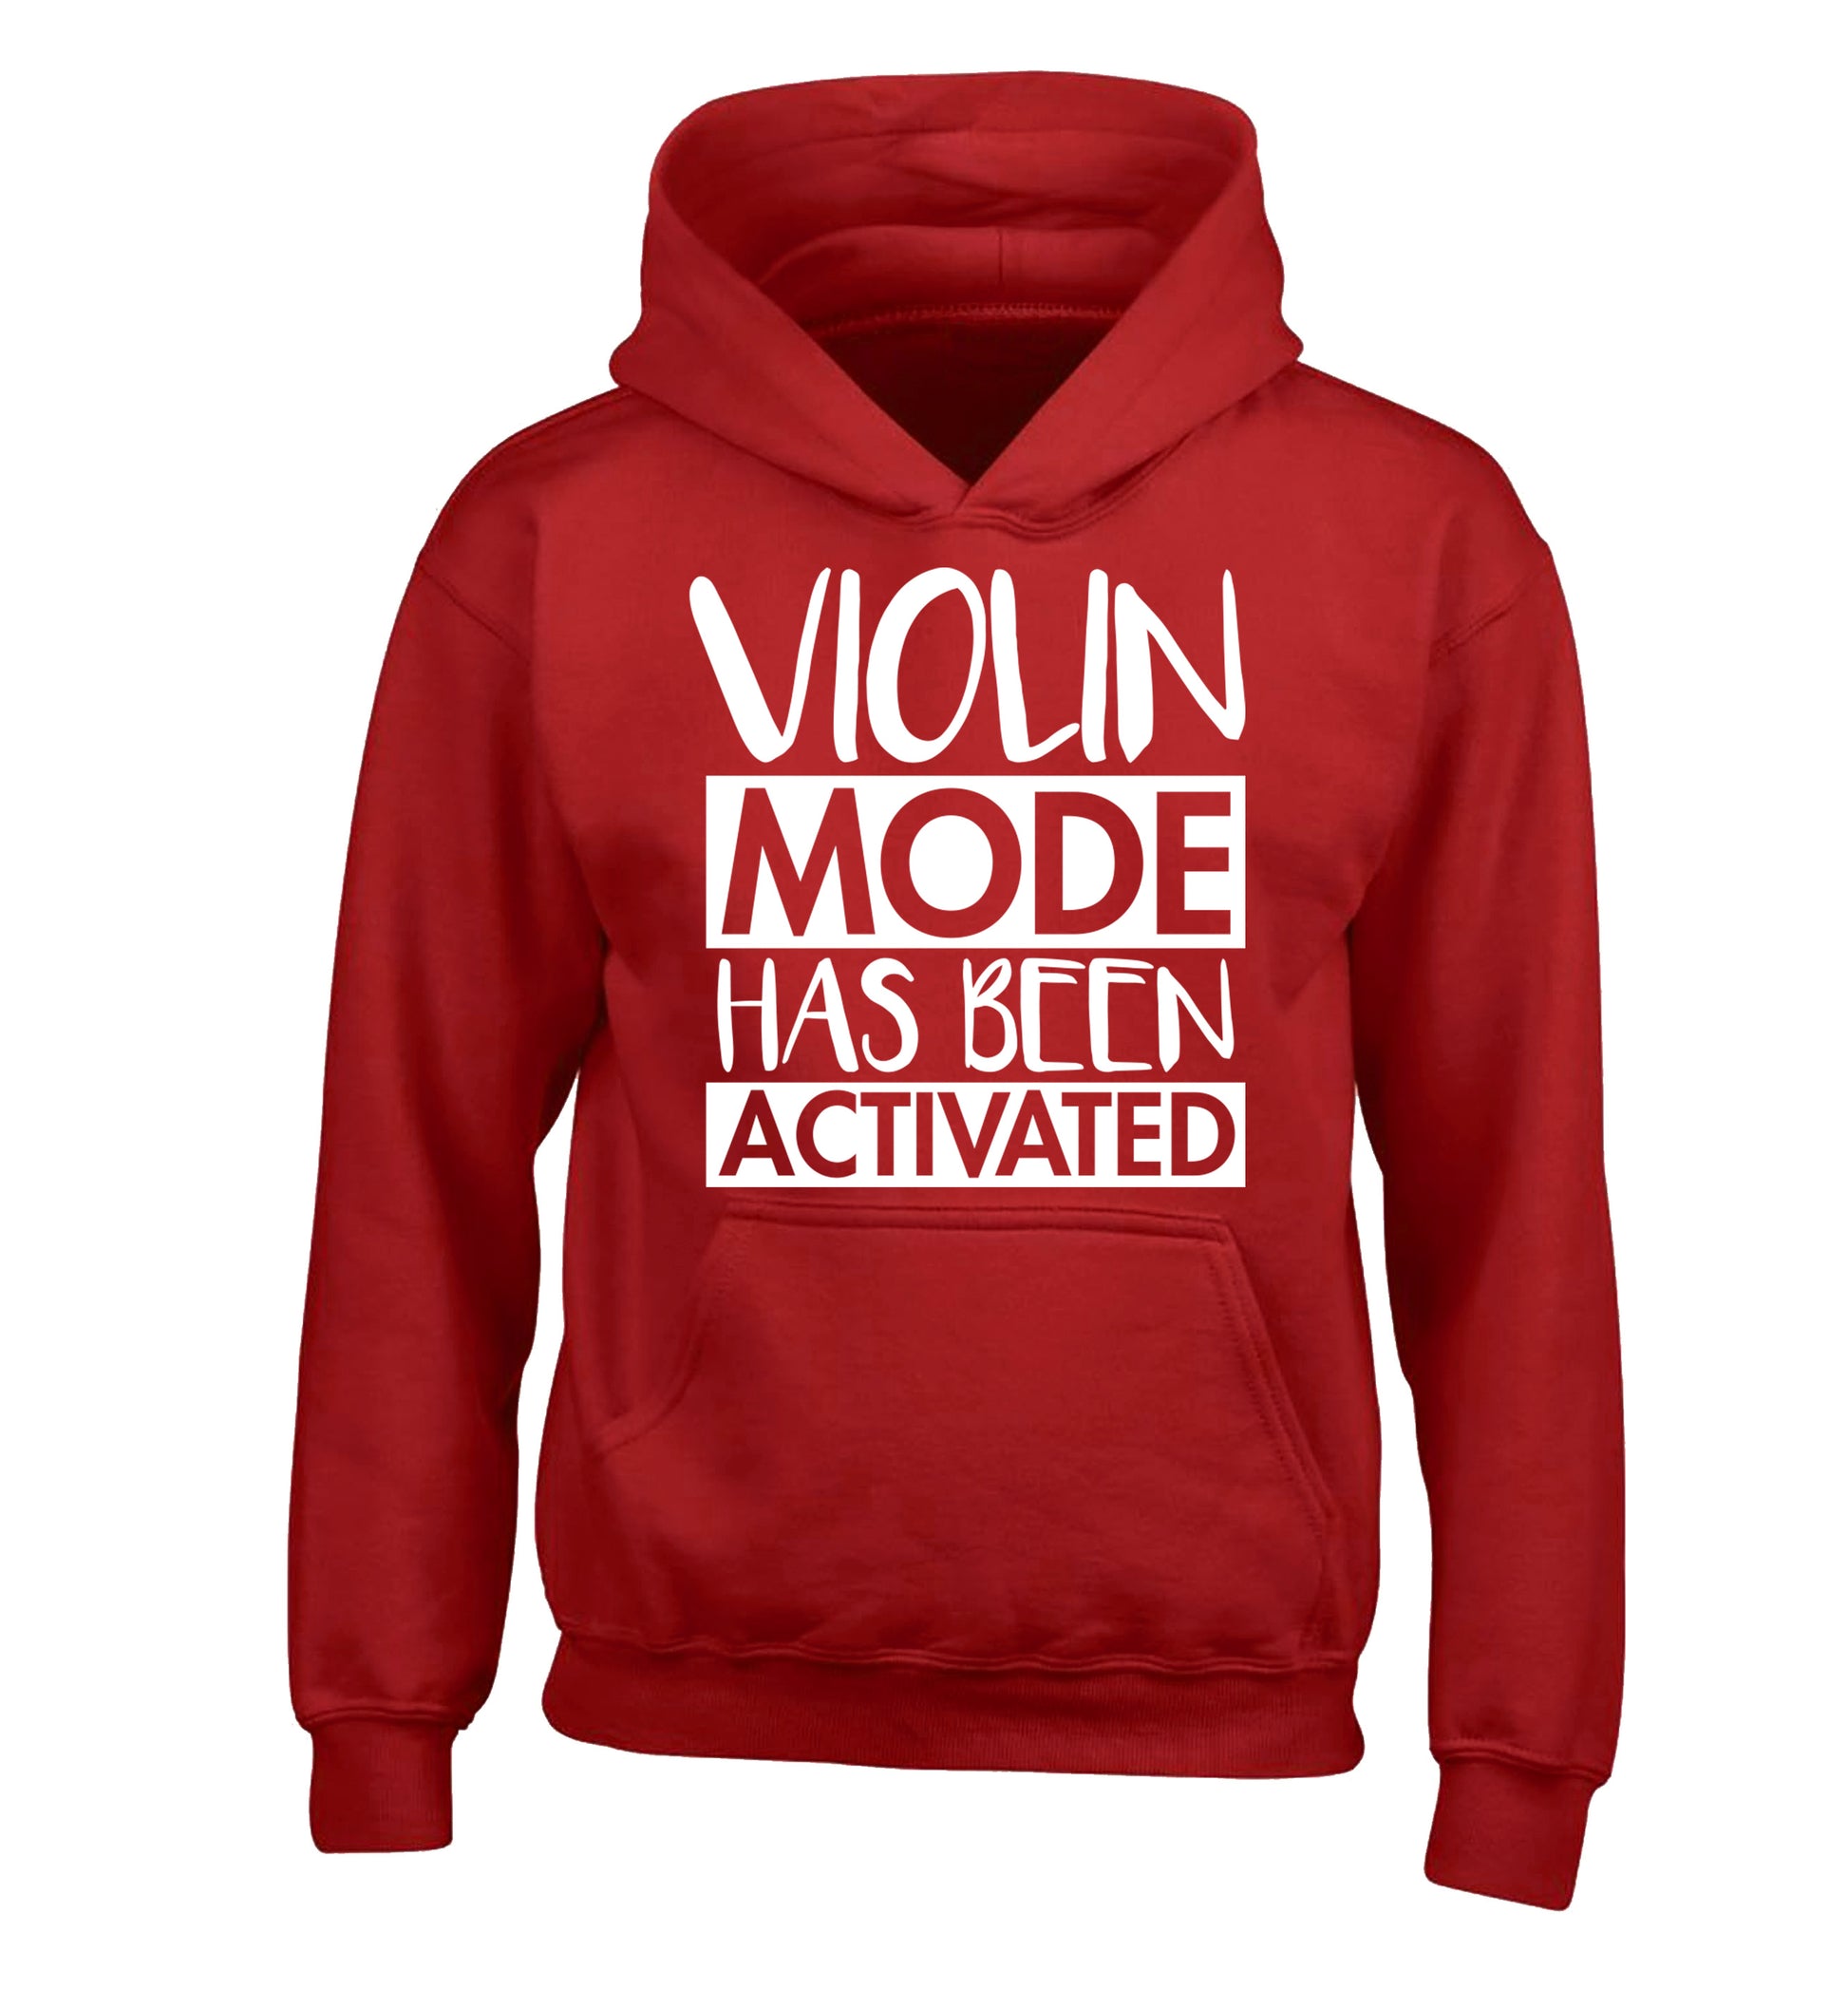 Violin Mode Activated children's red hoodie 12-13 Years